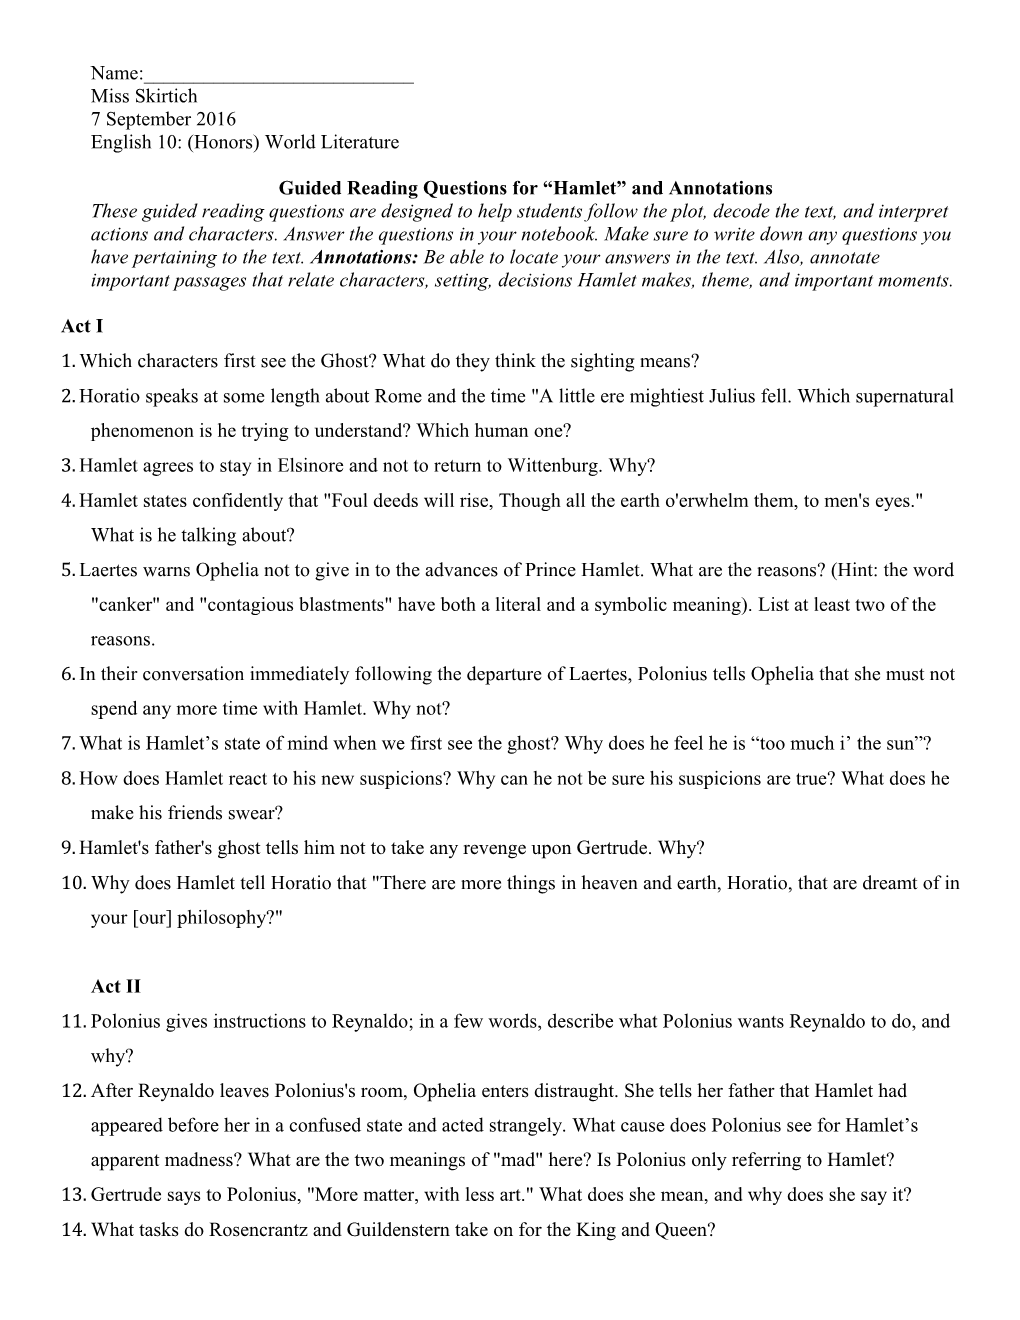 Guided Reading Questions for Hamlet and Annotations